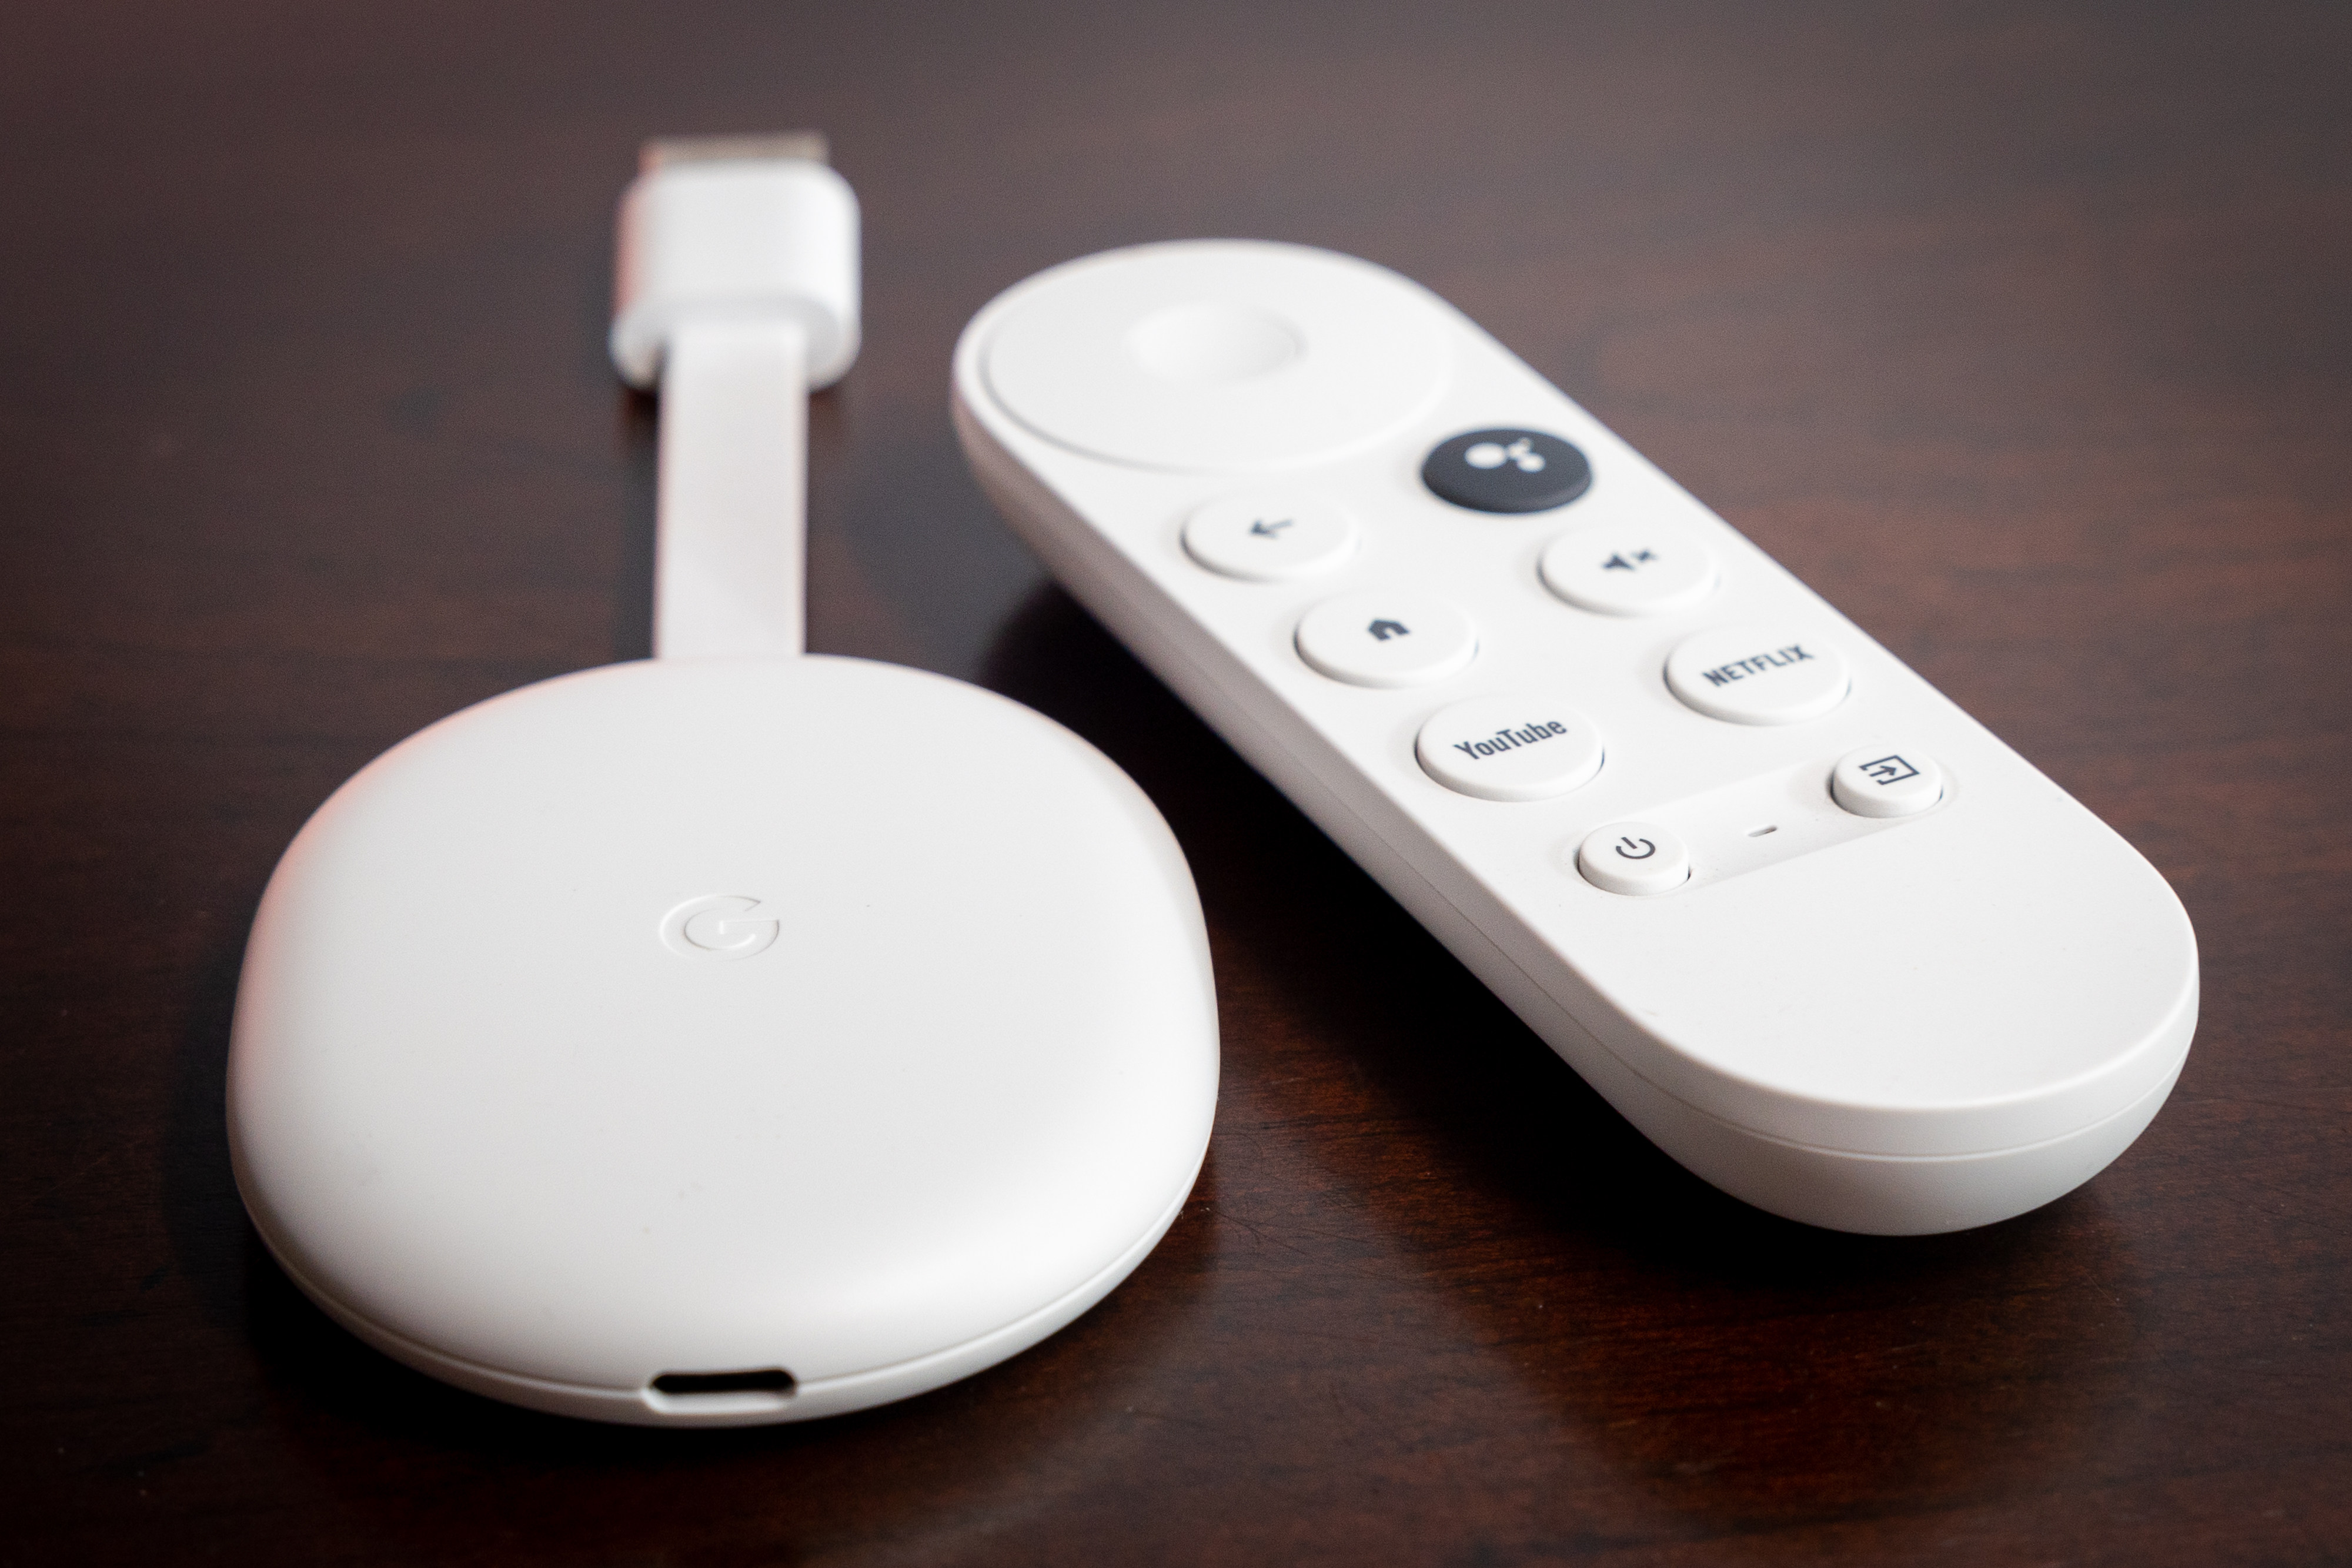 lobby Tag væk Alfabetisk orden Common Google Chromecast issues and how to fix them | Digital Trends